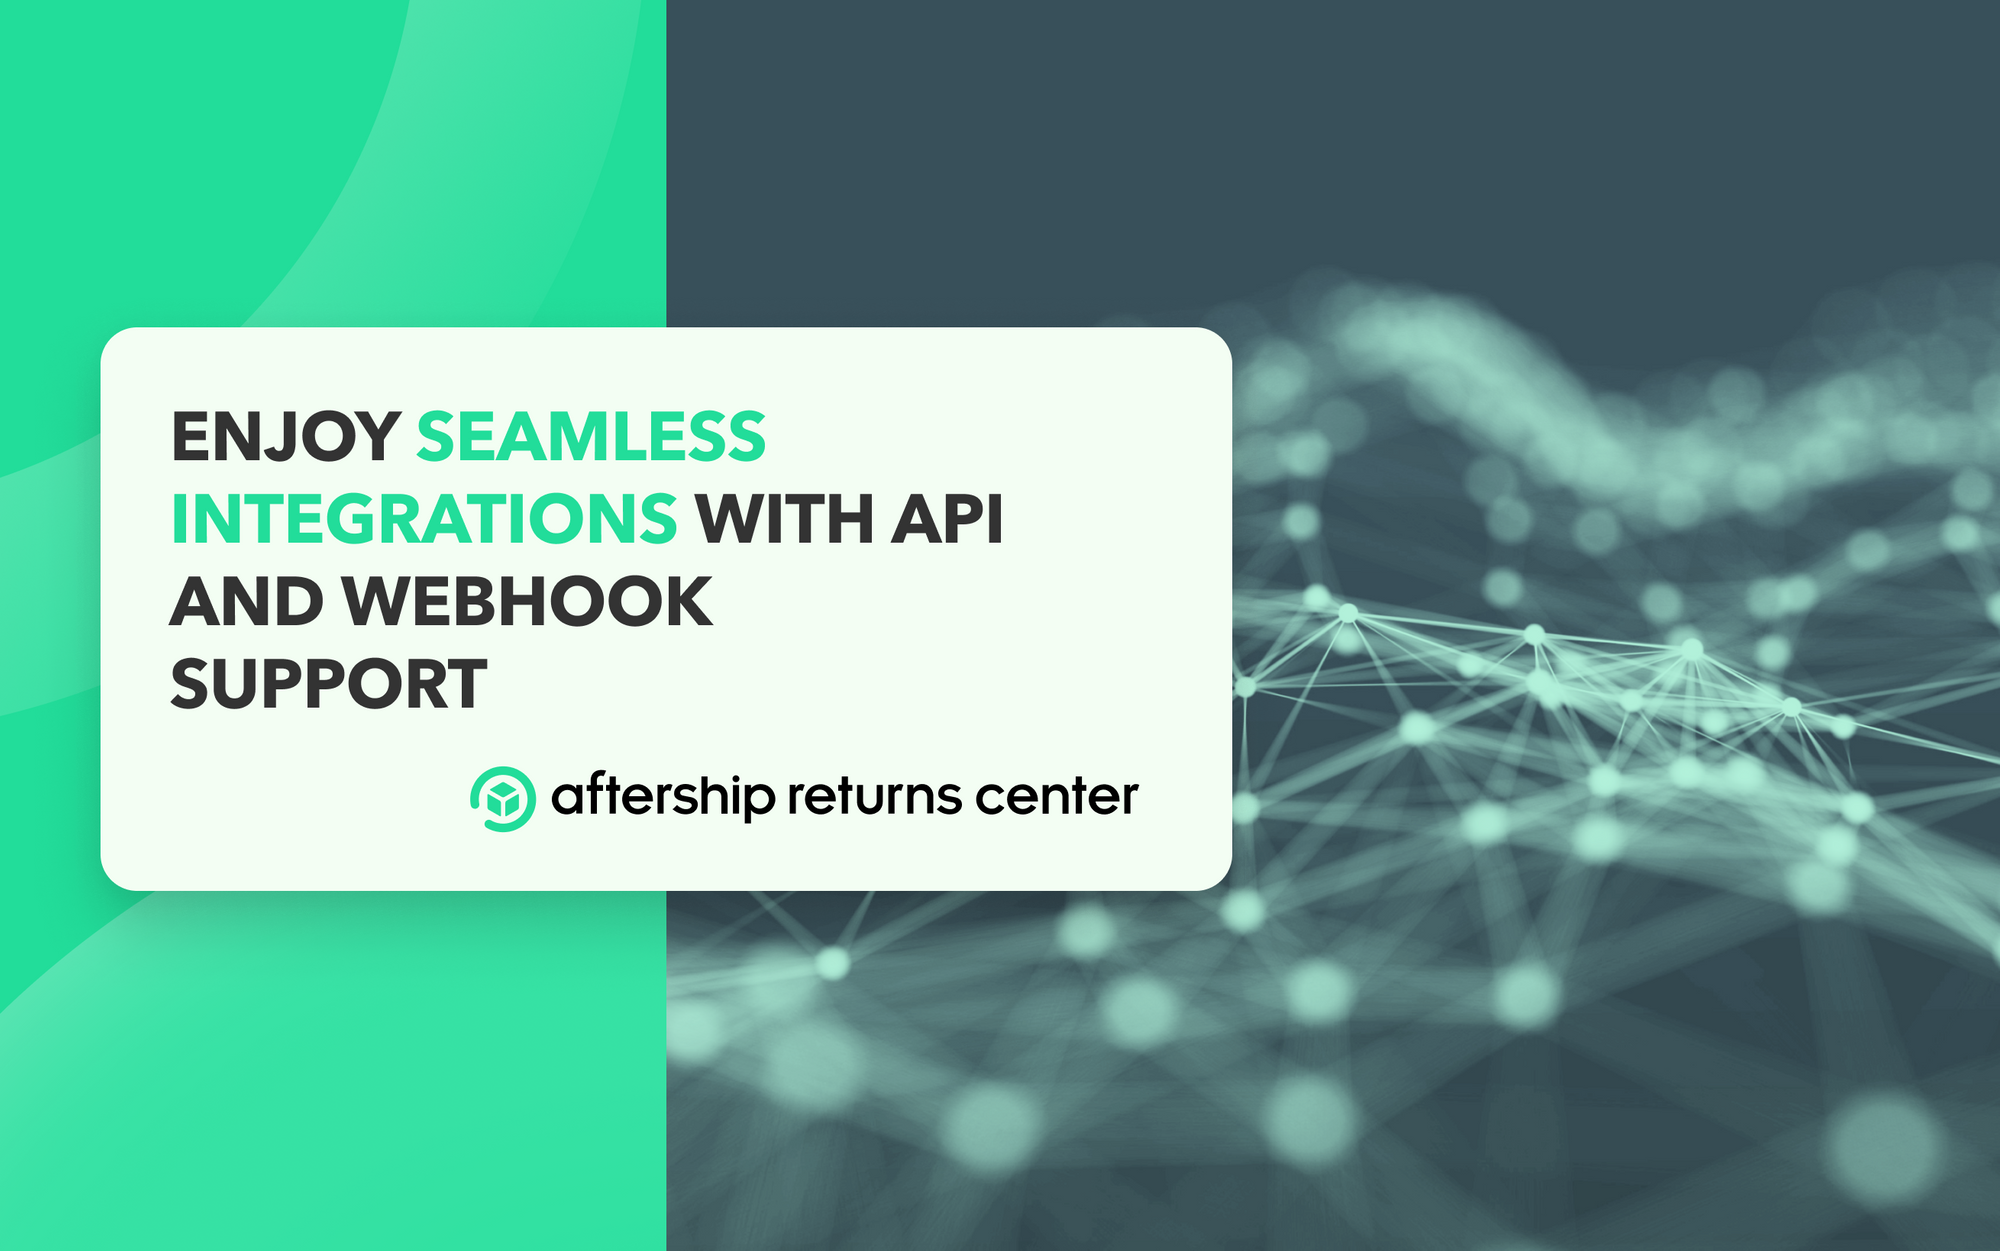 Introducing API & Webhook for facile data sync between applications